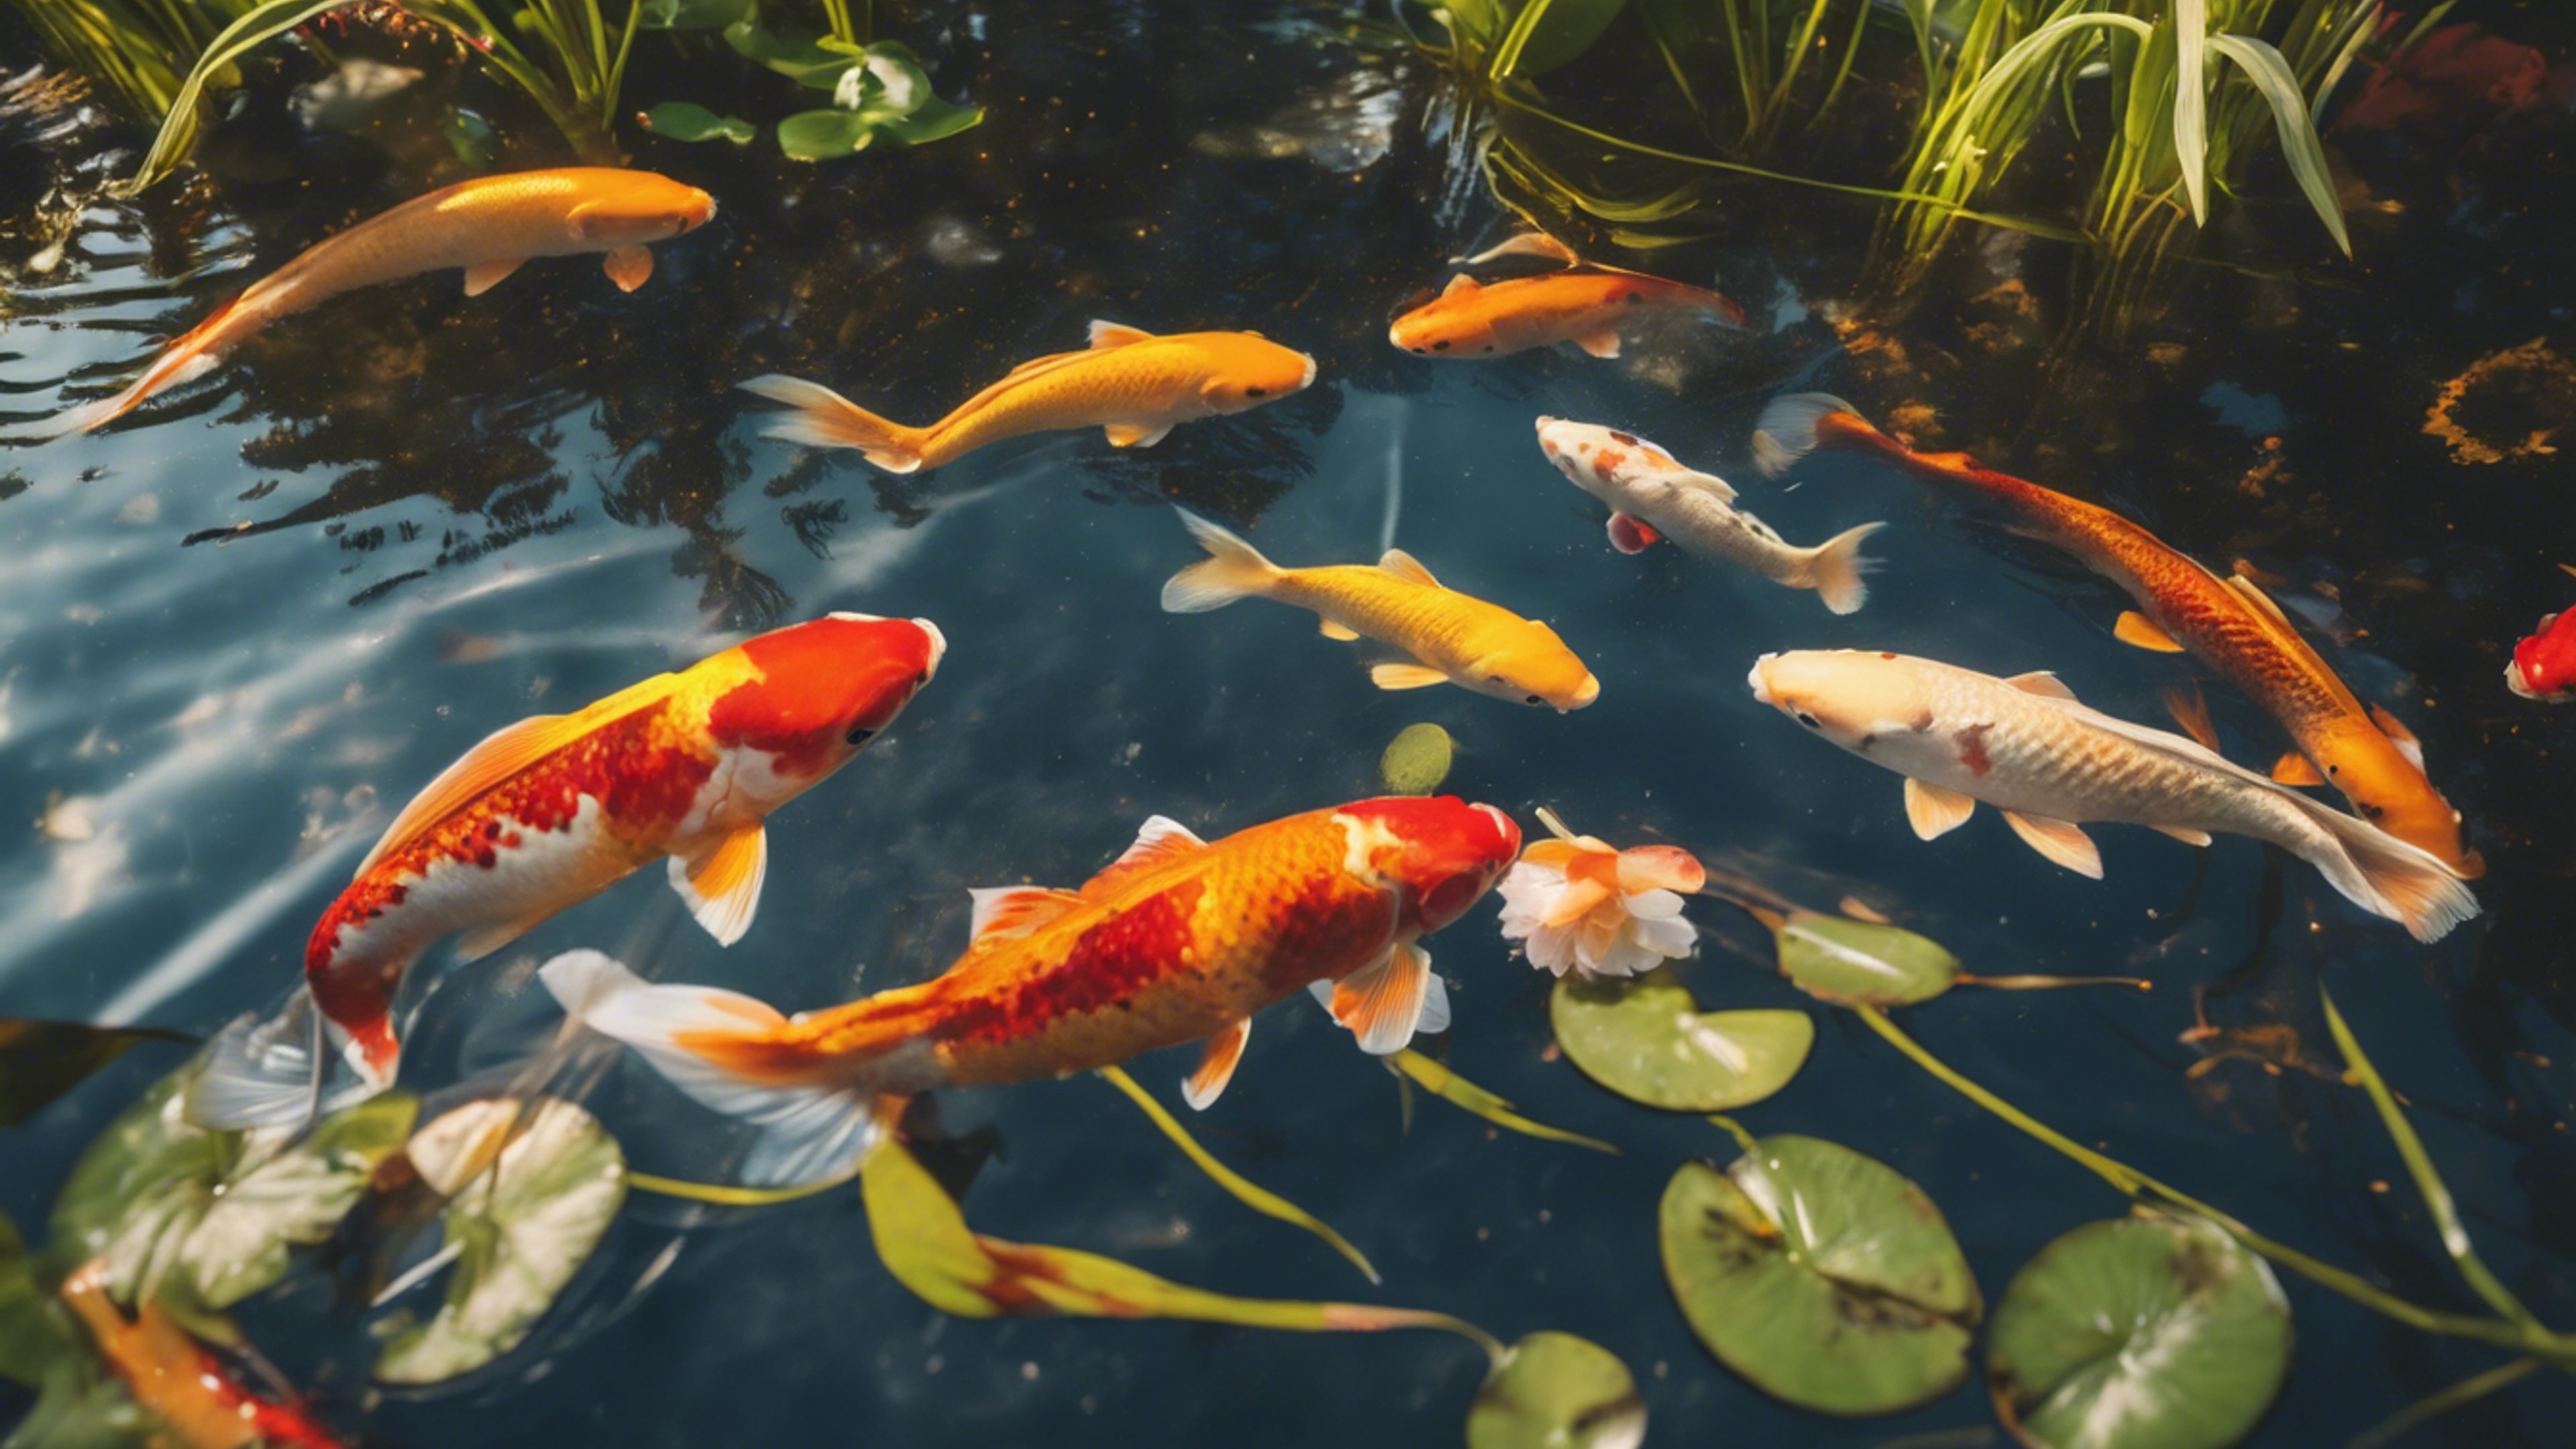 A koi pond with fish swirling under the lilies, their cool red and vibrant yellow scales shimmering under the sun. Tapeta[e1c53d91cfb64fffb364]